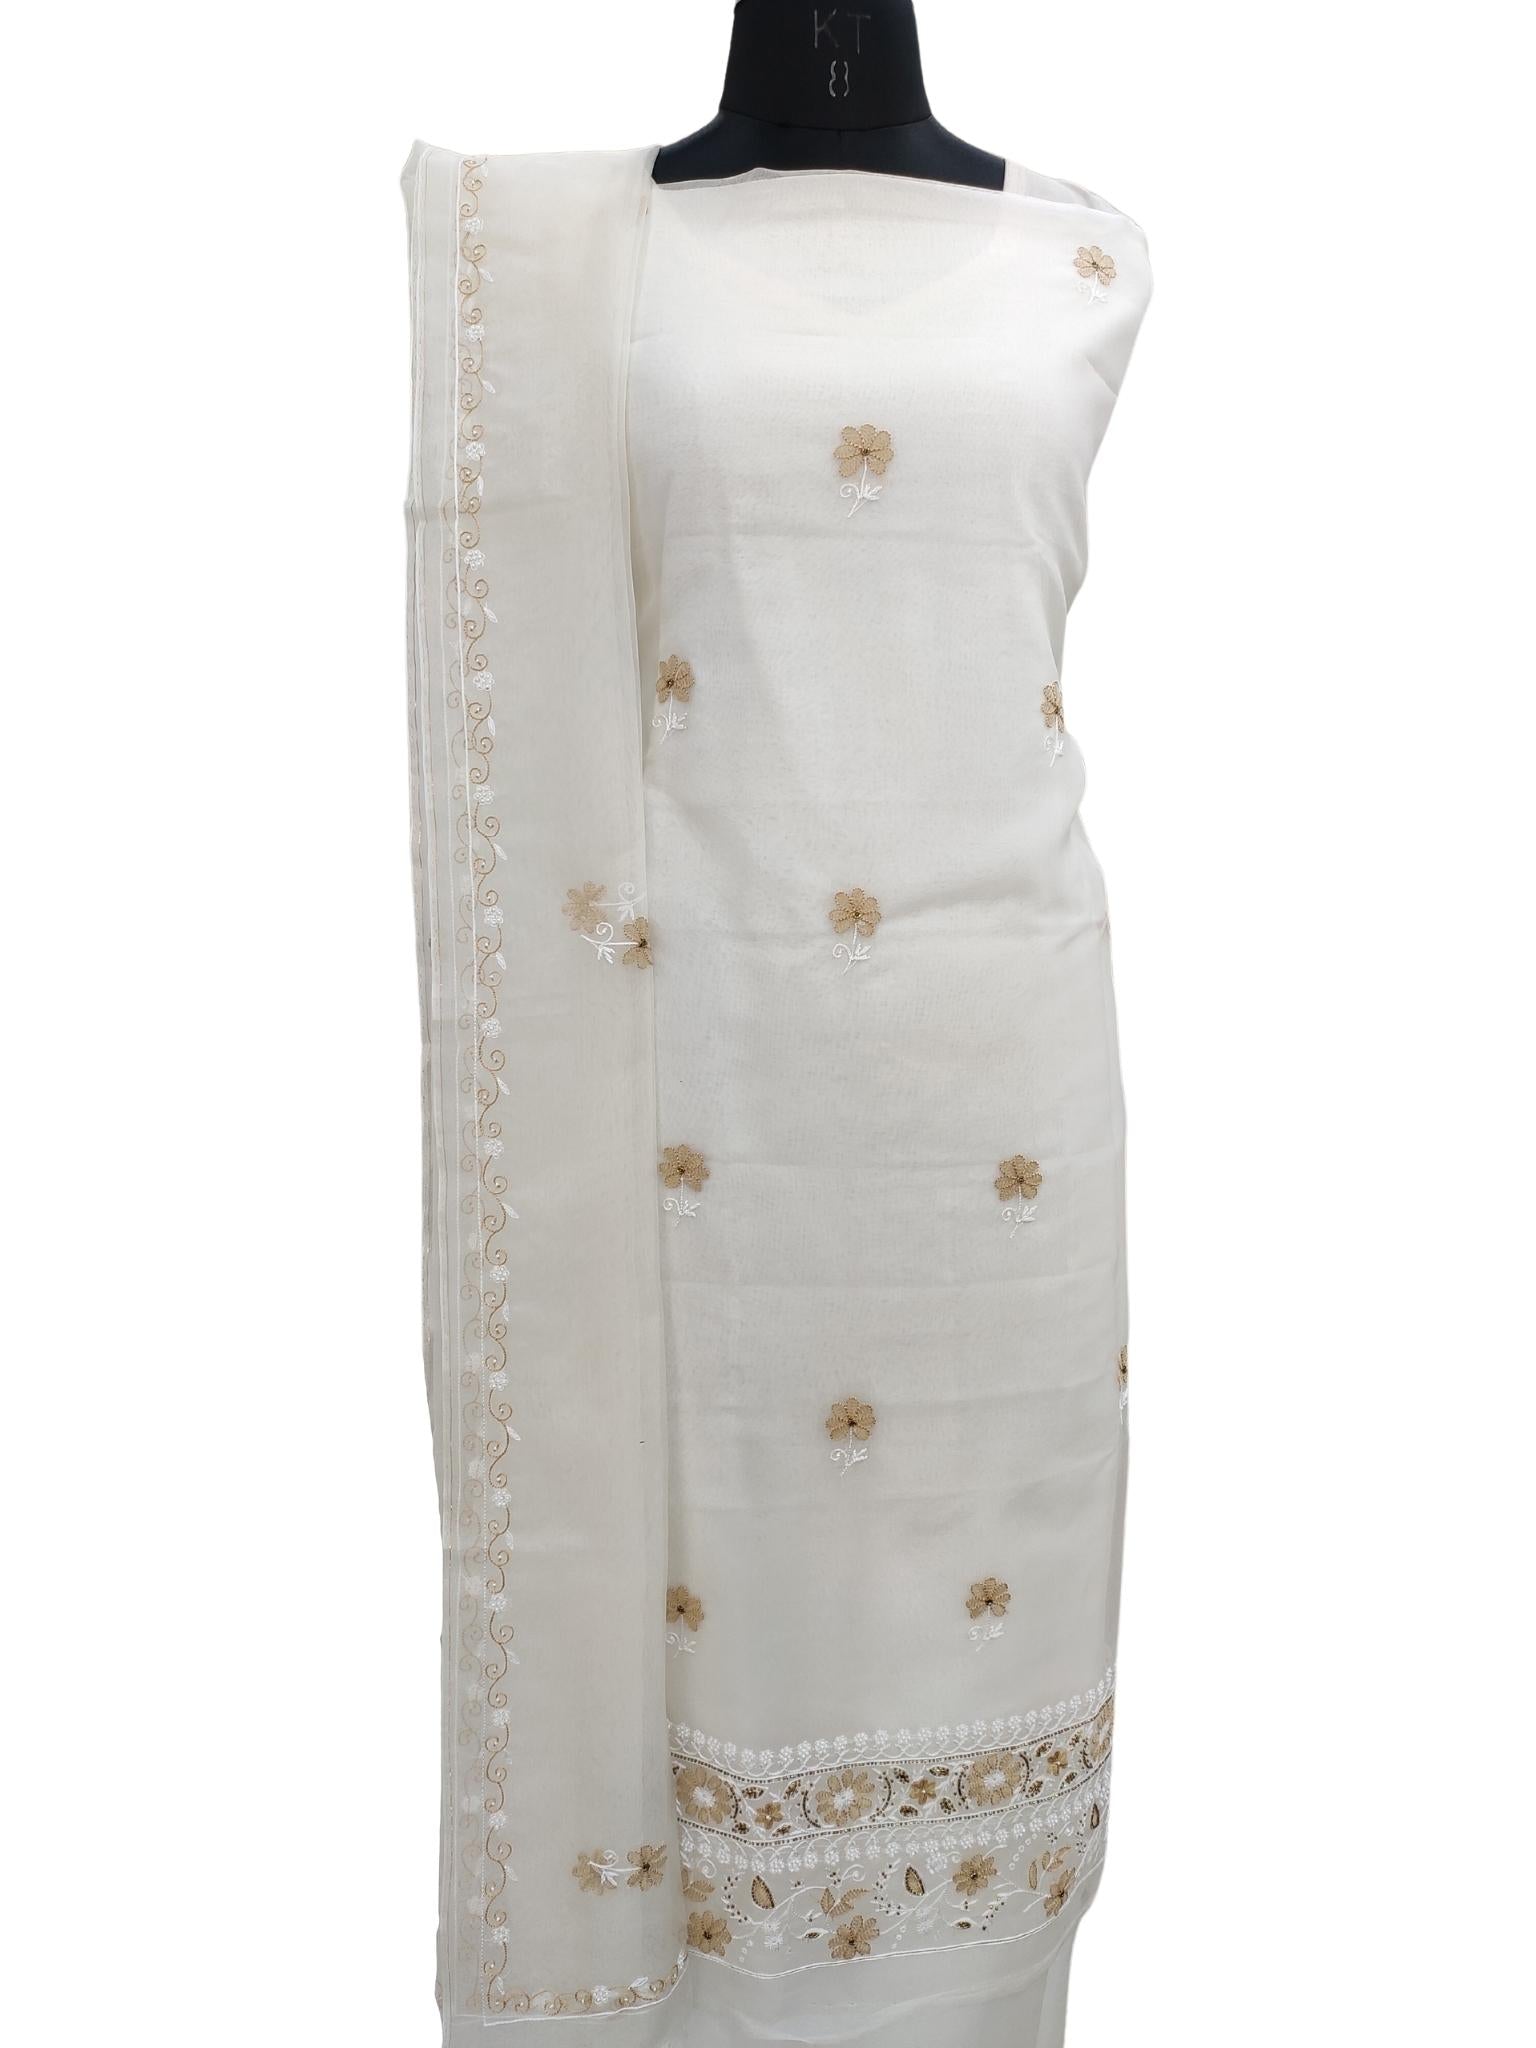 Shyamal Chikan Hand Embroidered White Organza Lucknowi Chikankari Unstitched Suit Piece ( Set of 2 ) With Pearl and Cutdana Work - S20871